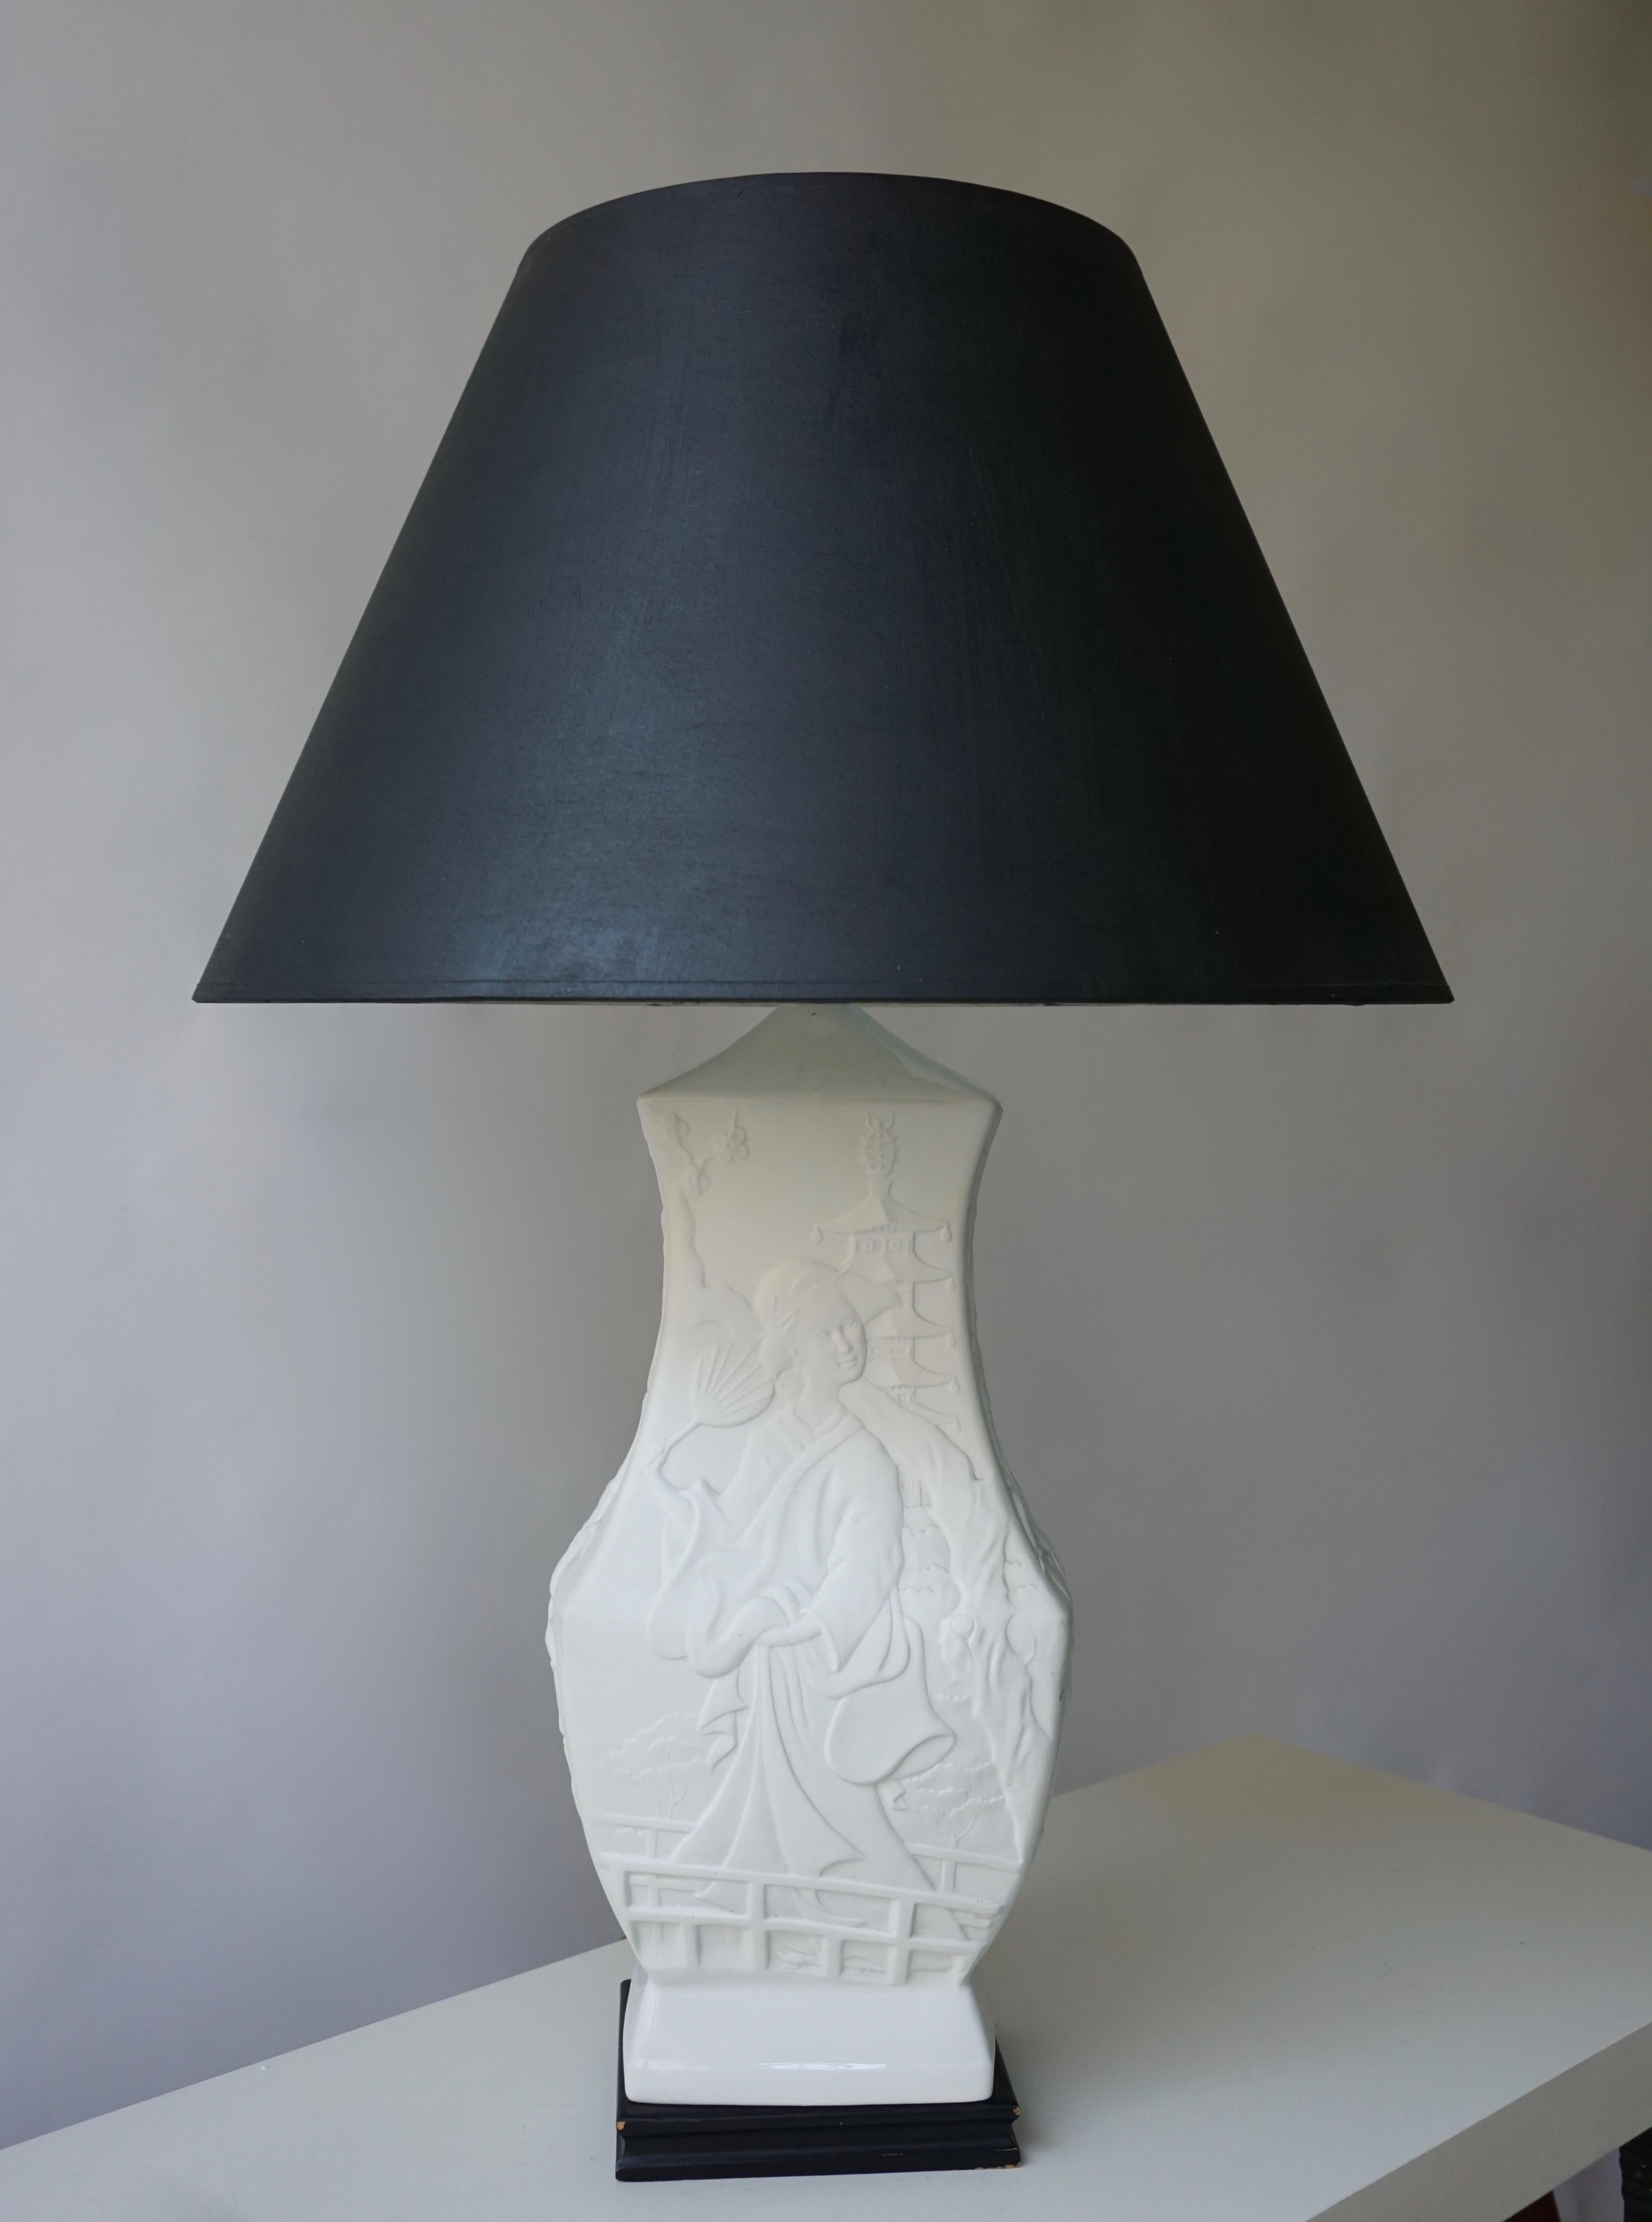 Porcelain table lamp on a wooden base.
Measures: Height base 52 cm.
Width base 22 cm.
Depth base 17 cm.
Shade is not for sale and is not included in the price.